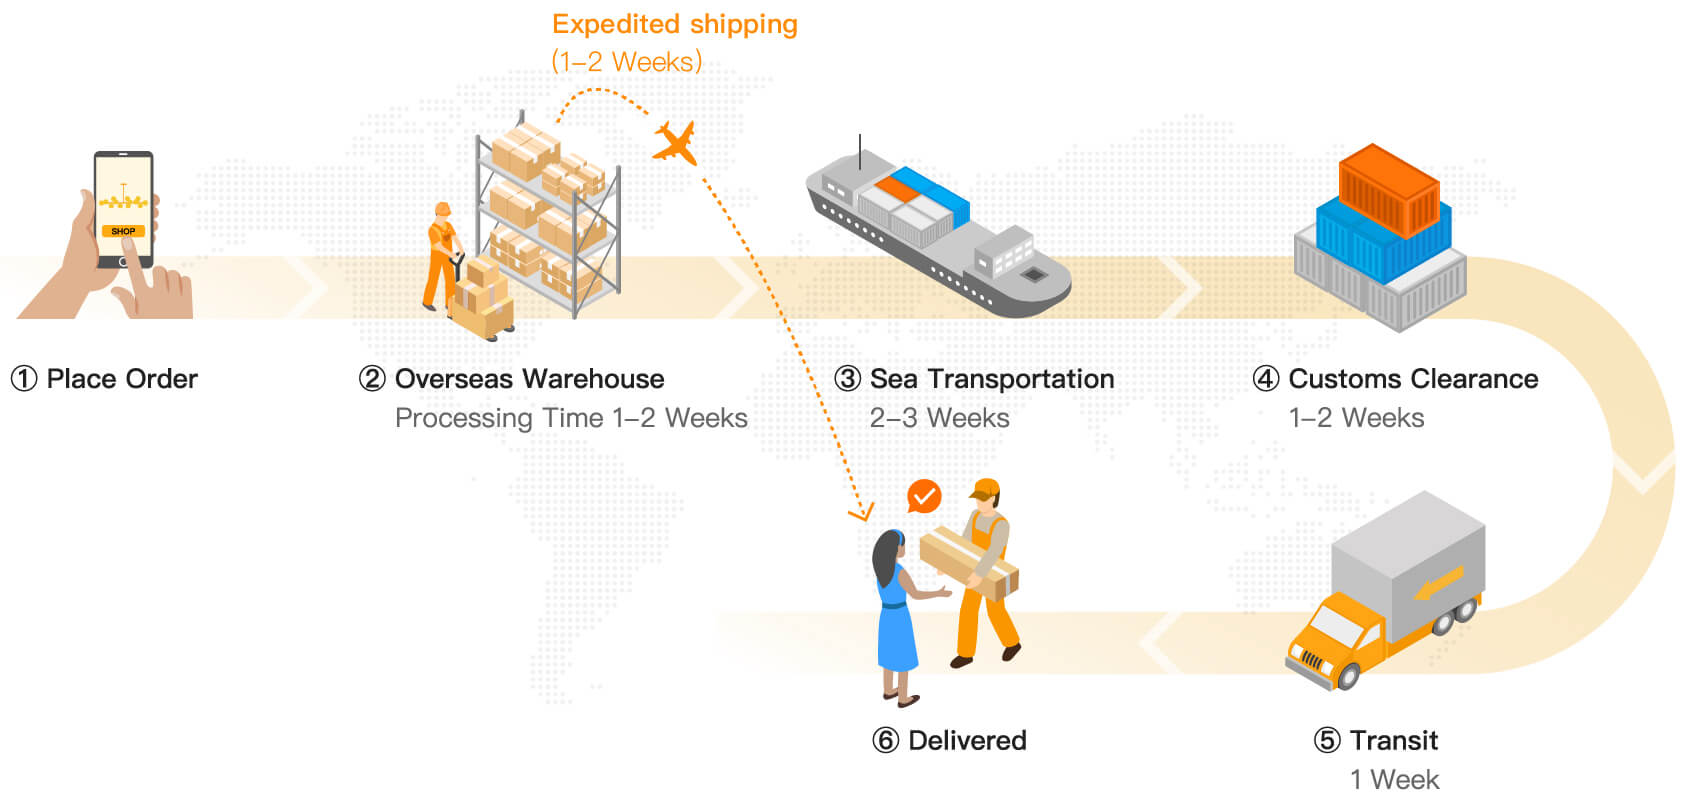 process of NON-Fast Delivery items